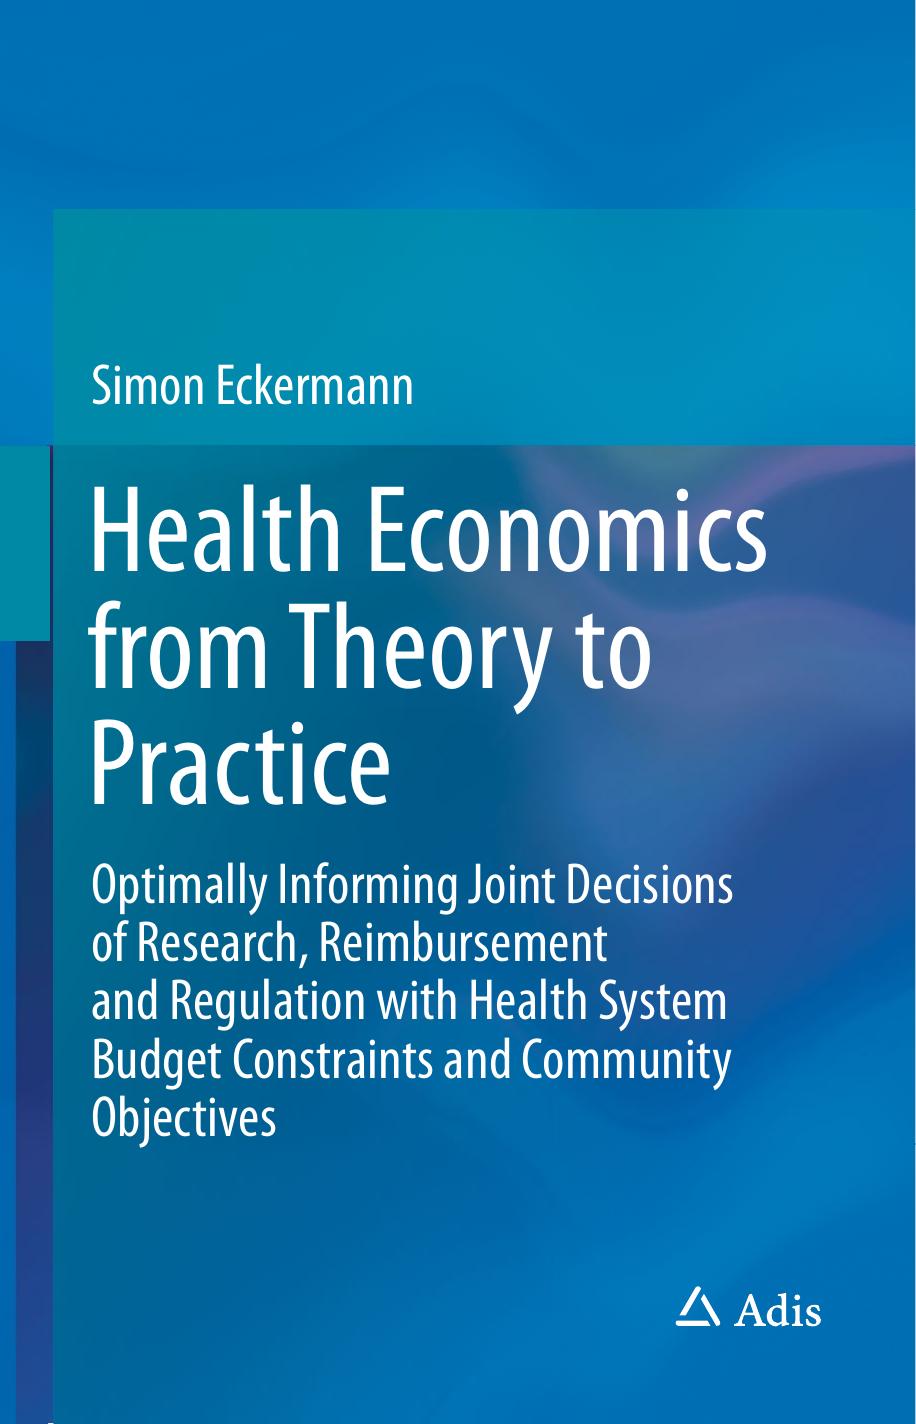 Health Economics from Theory to Practice Optimally Informing Joint Decisions of Research, Reimbursement and Regulation 2018